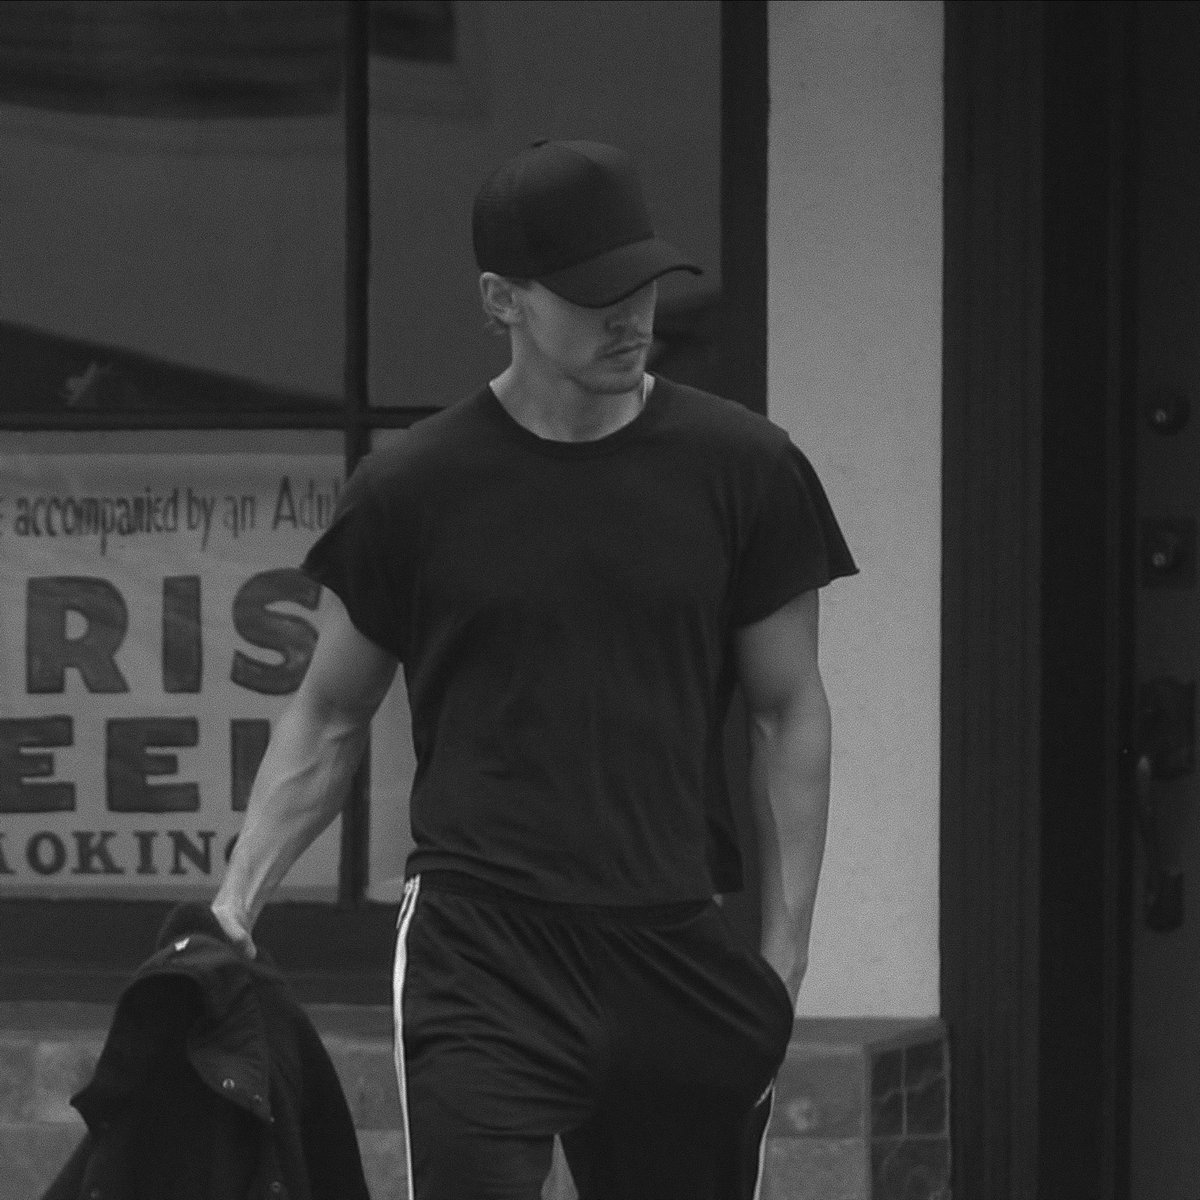 #AustinButler #AppreciationPost #BeautifulMan #Style #StreetStyle #Outfit #Menstyle #Cap #Muscles